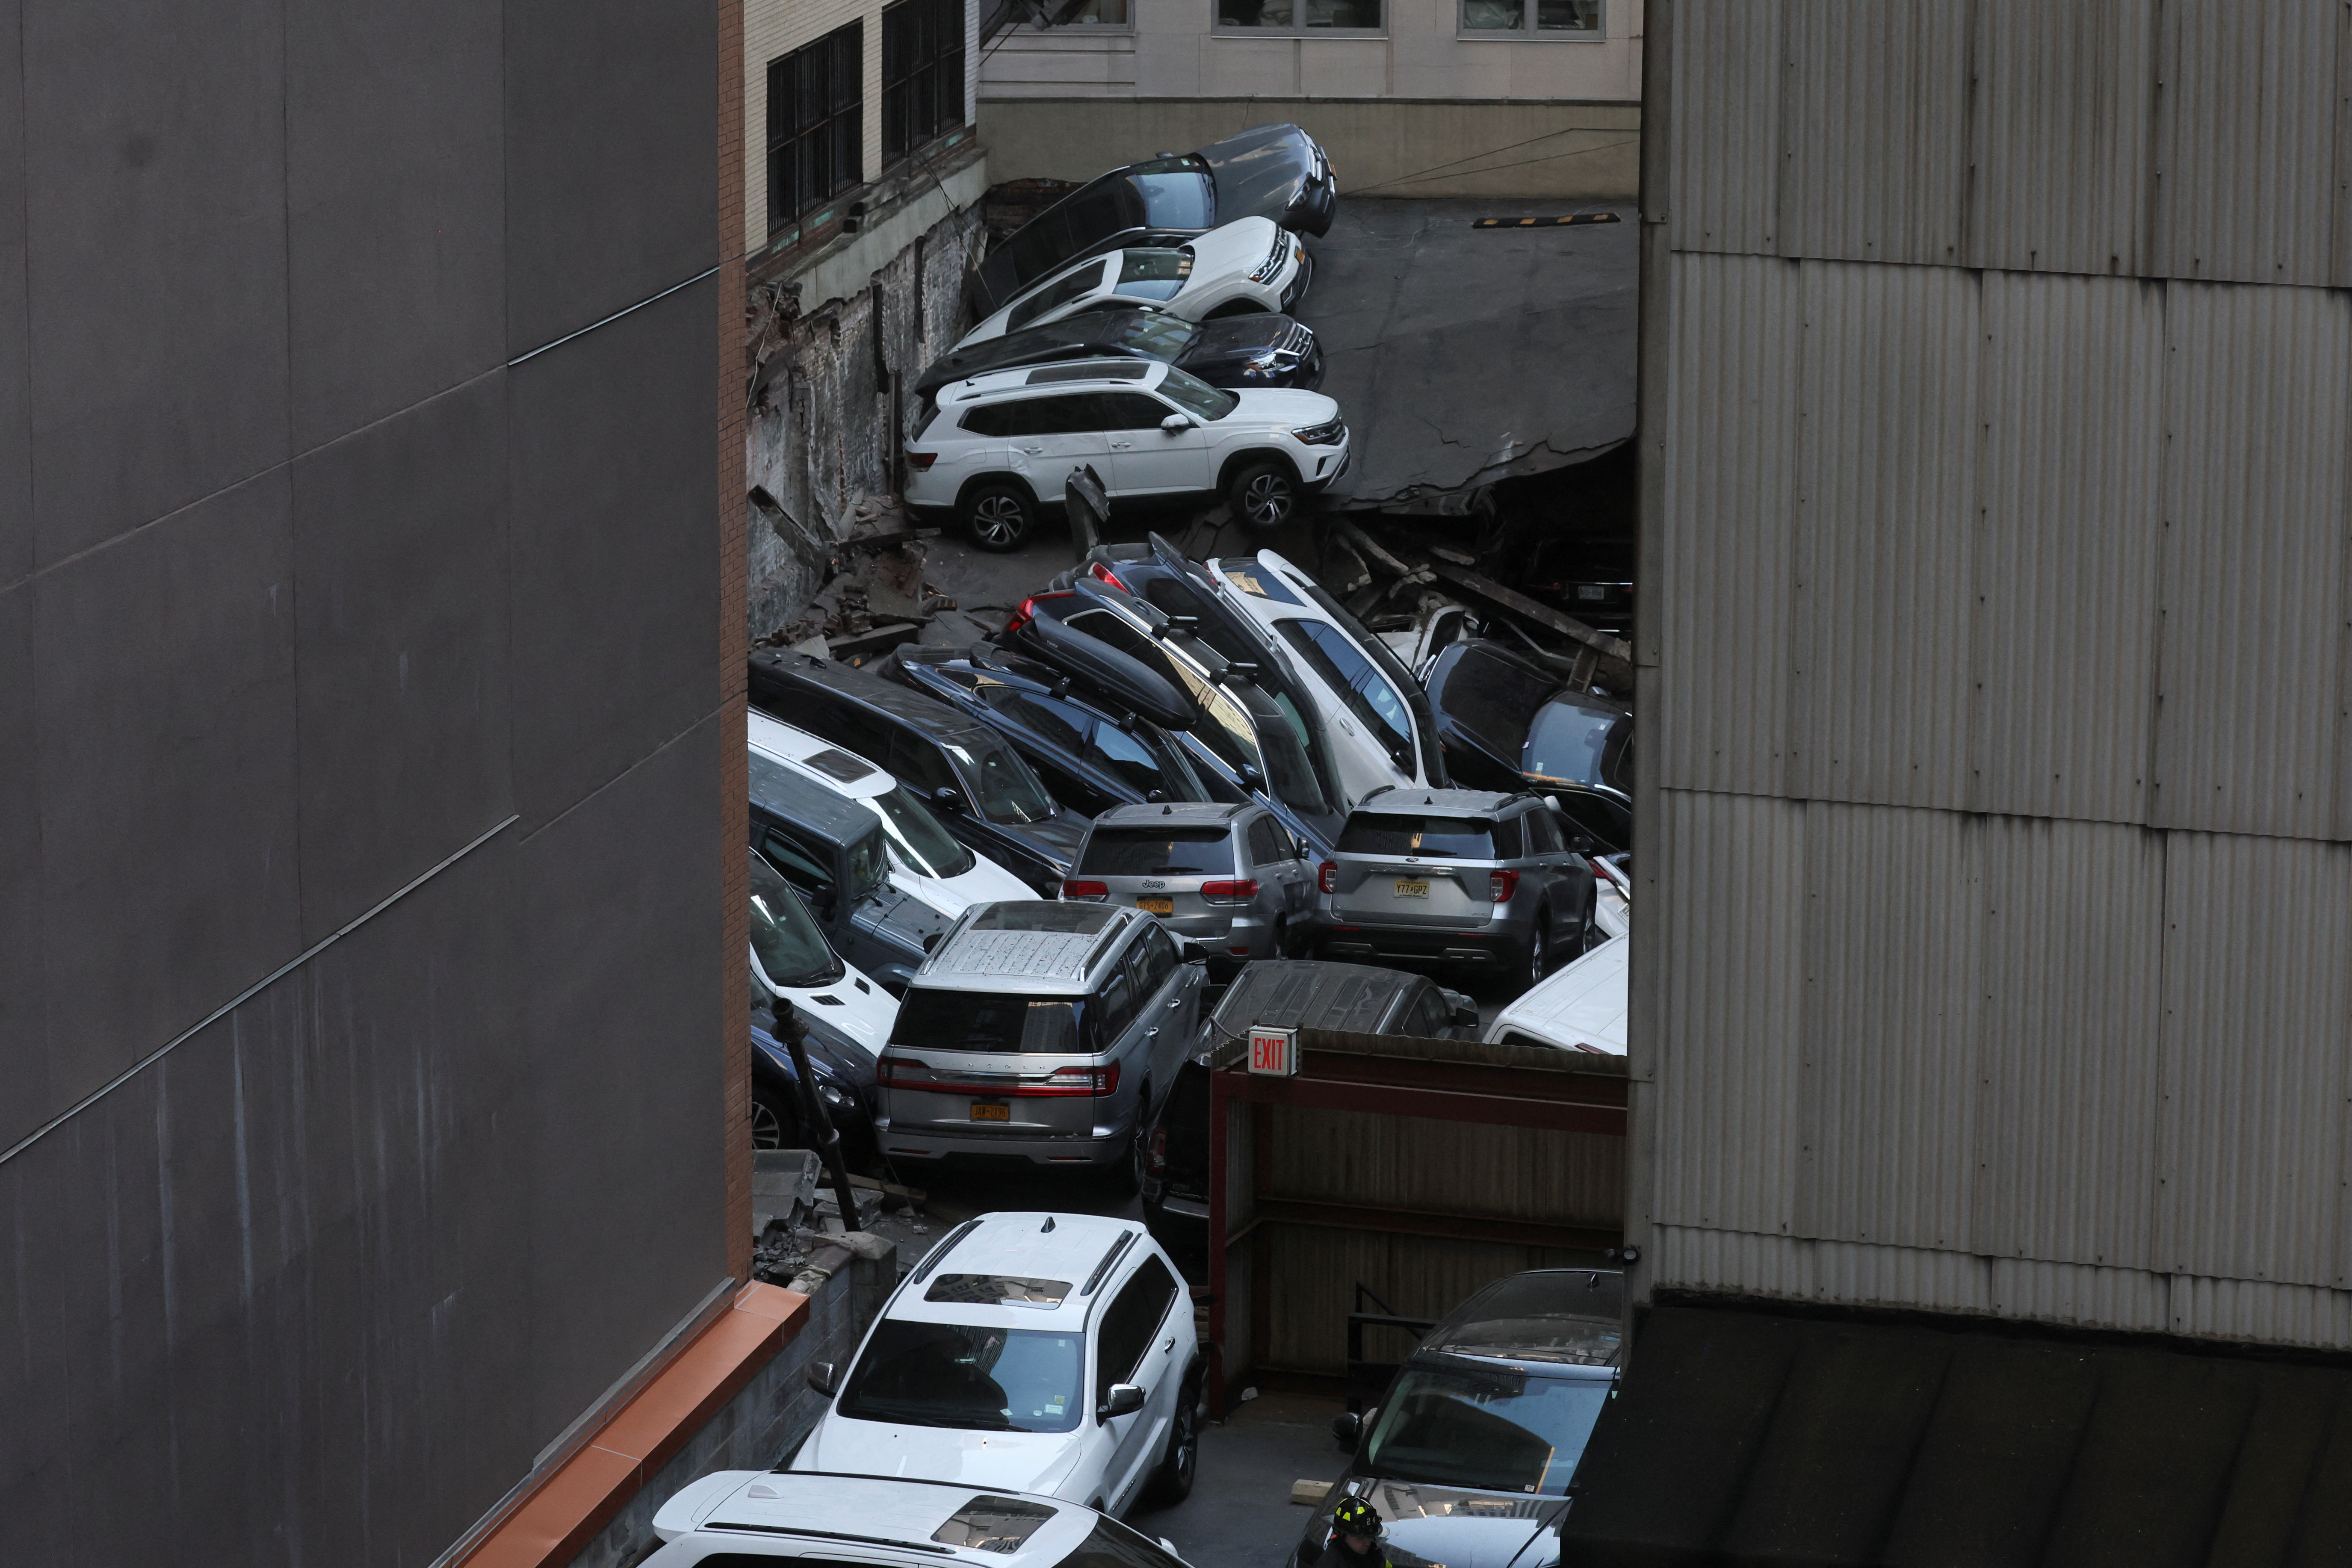 Aftermath of the collapse of a parking garage in the Manhattan borough of New York City